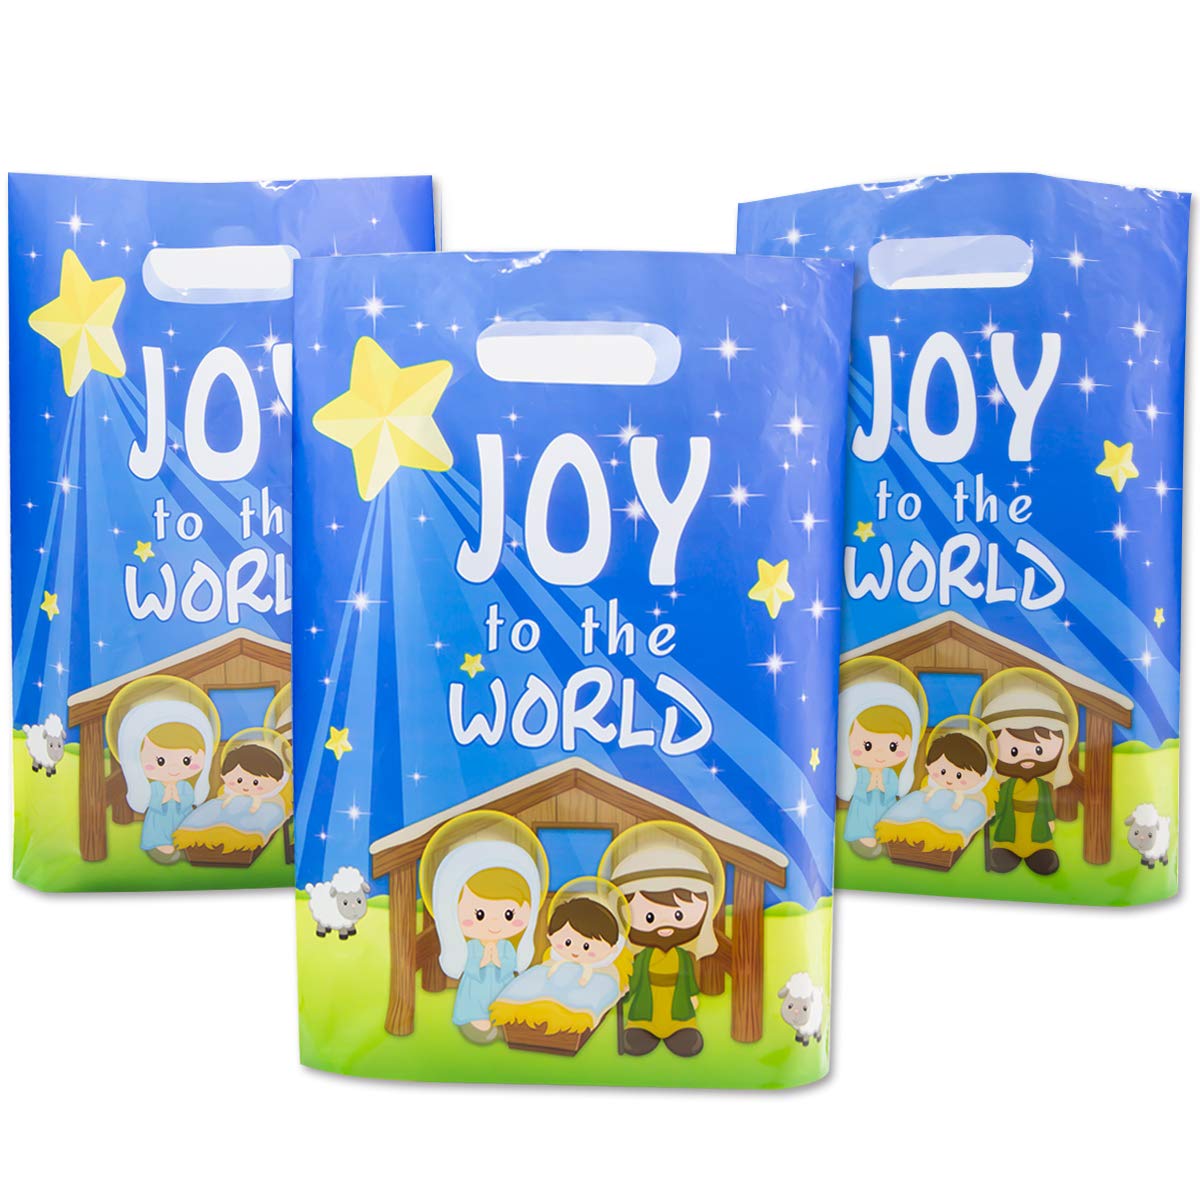 Book Cover ceiba tree Nativity Goodie Bags Treat Goody Bags for Vacation Bible School Xmas Nativity Party Supply 25Pcs